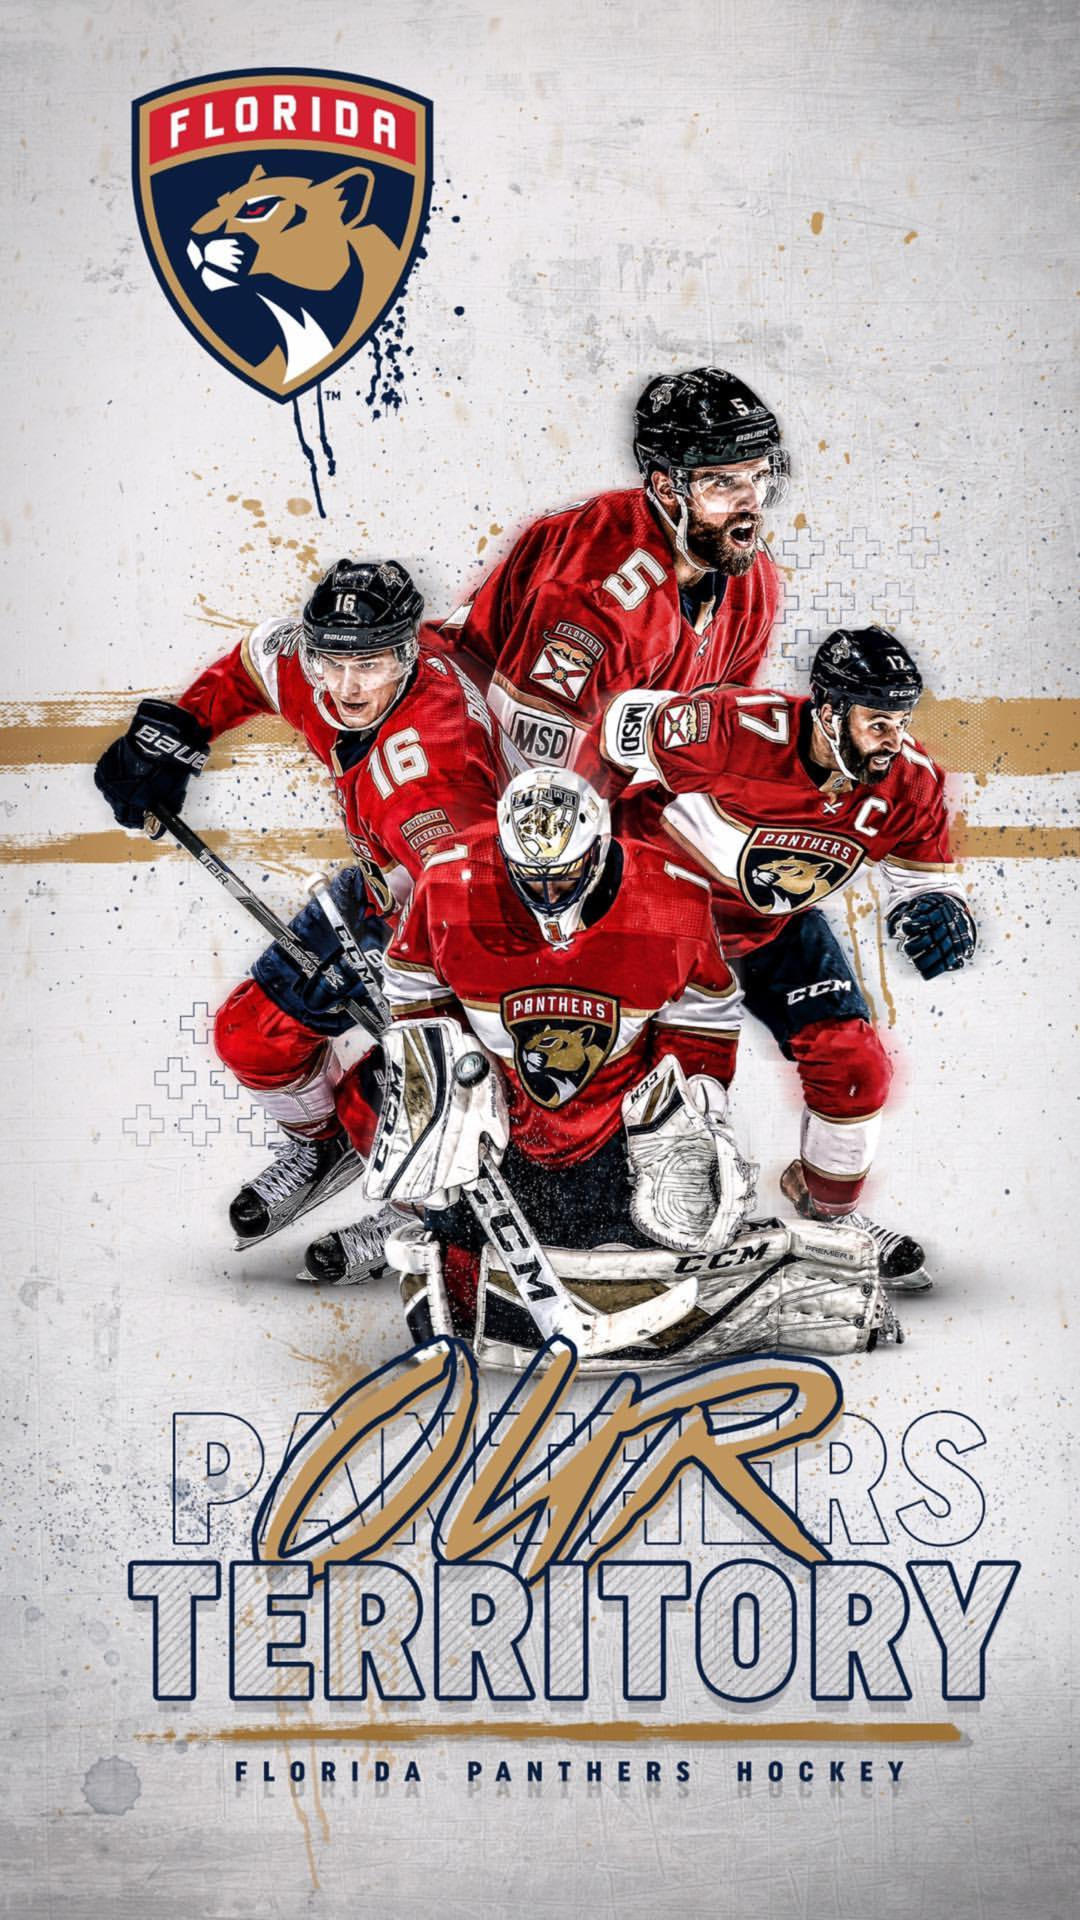 The Florida Panthers need some love — Wallpaper Wednesday!!! 9.12.18